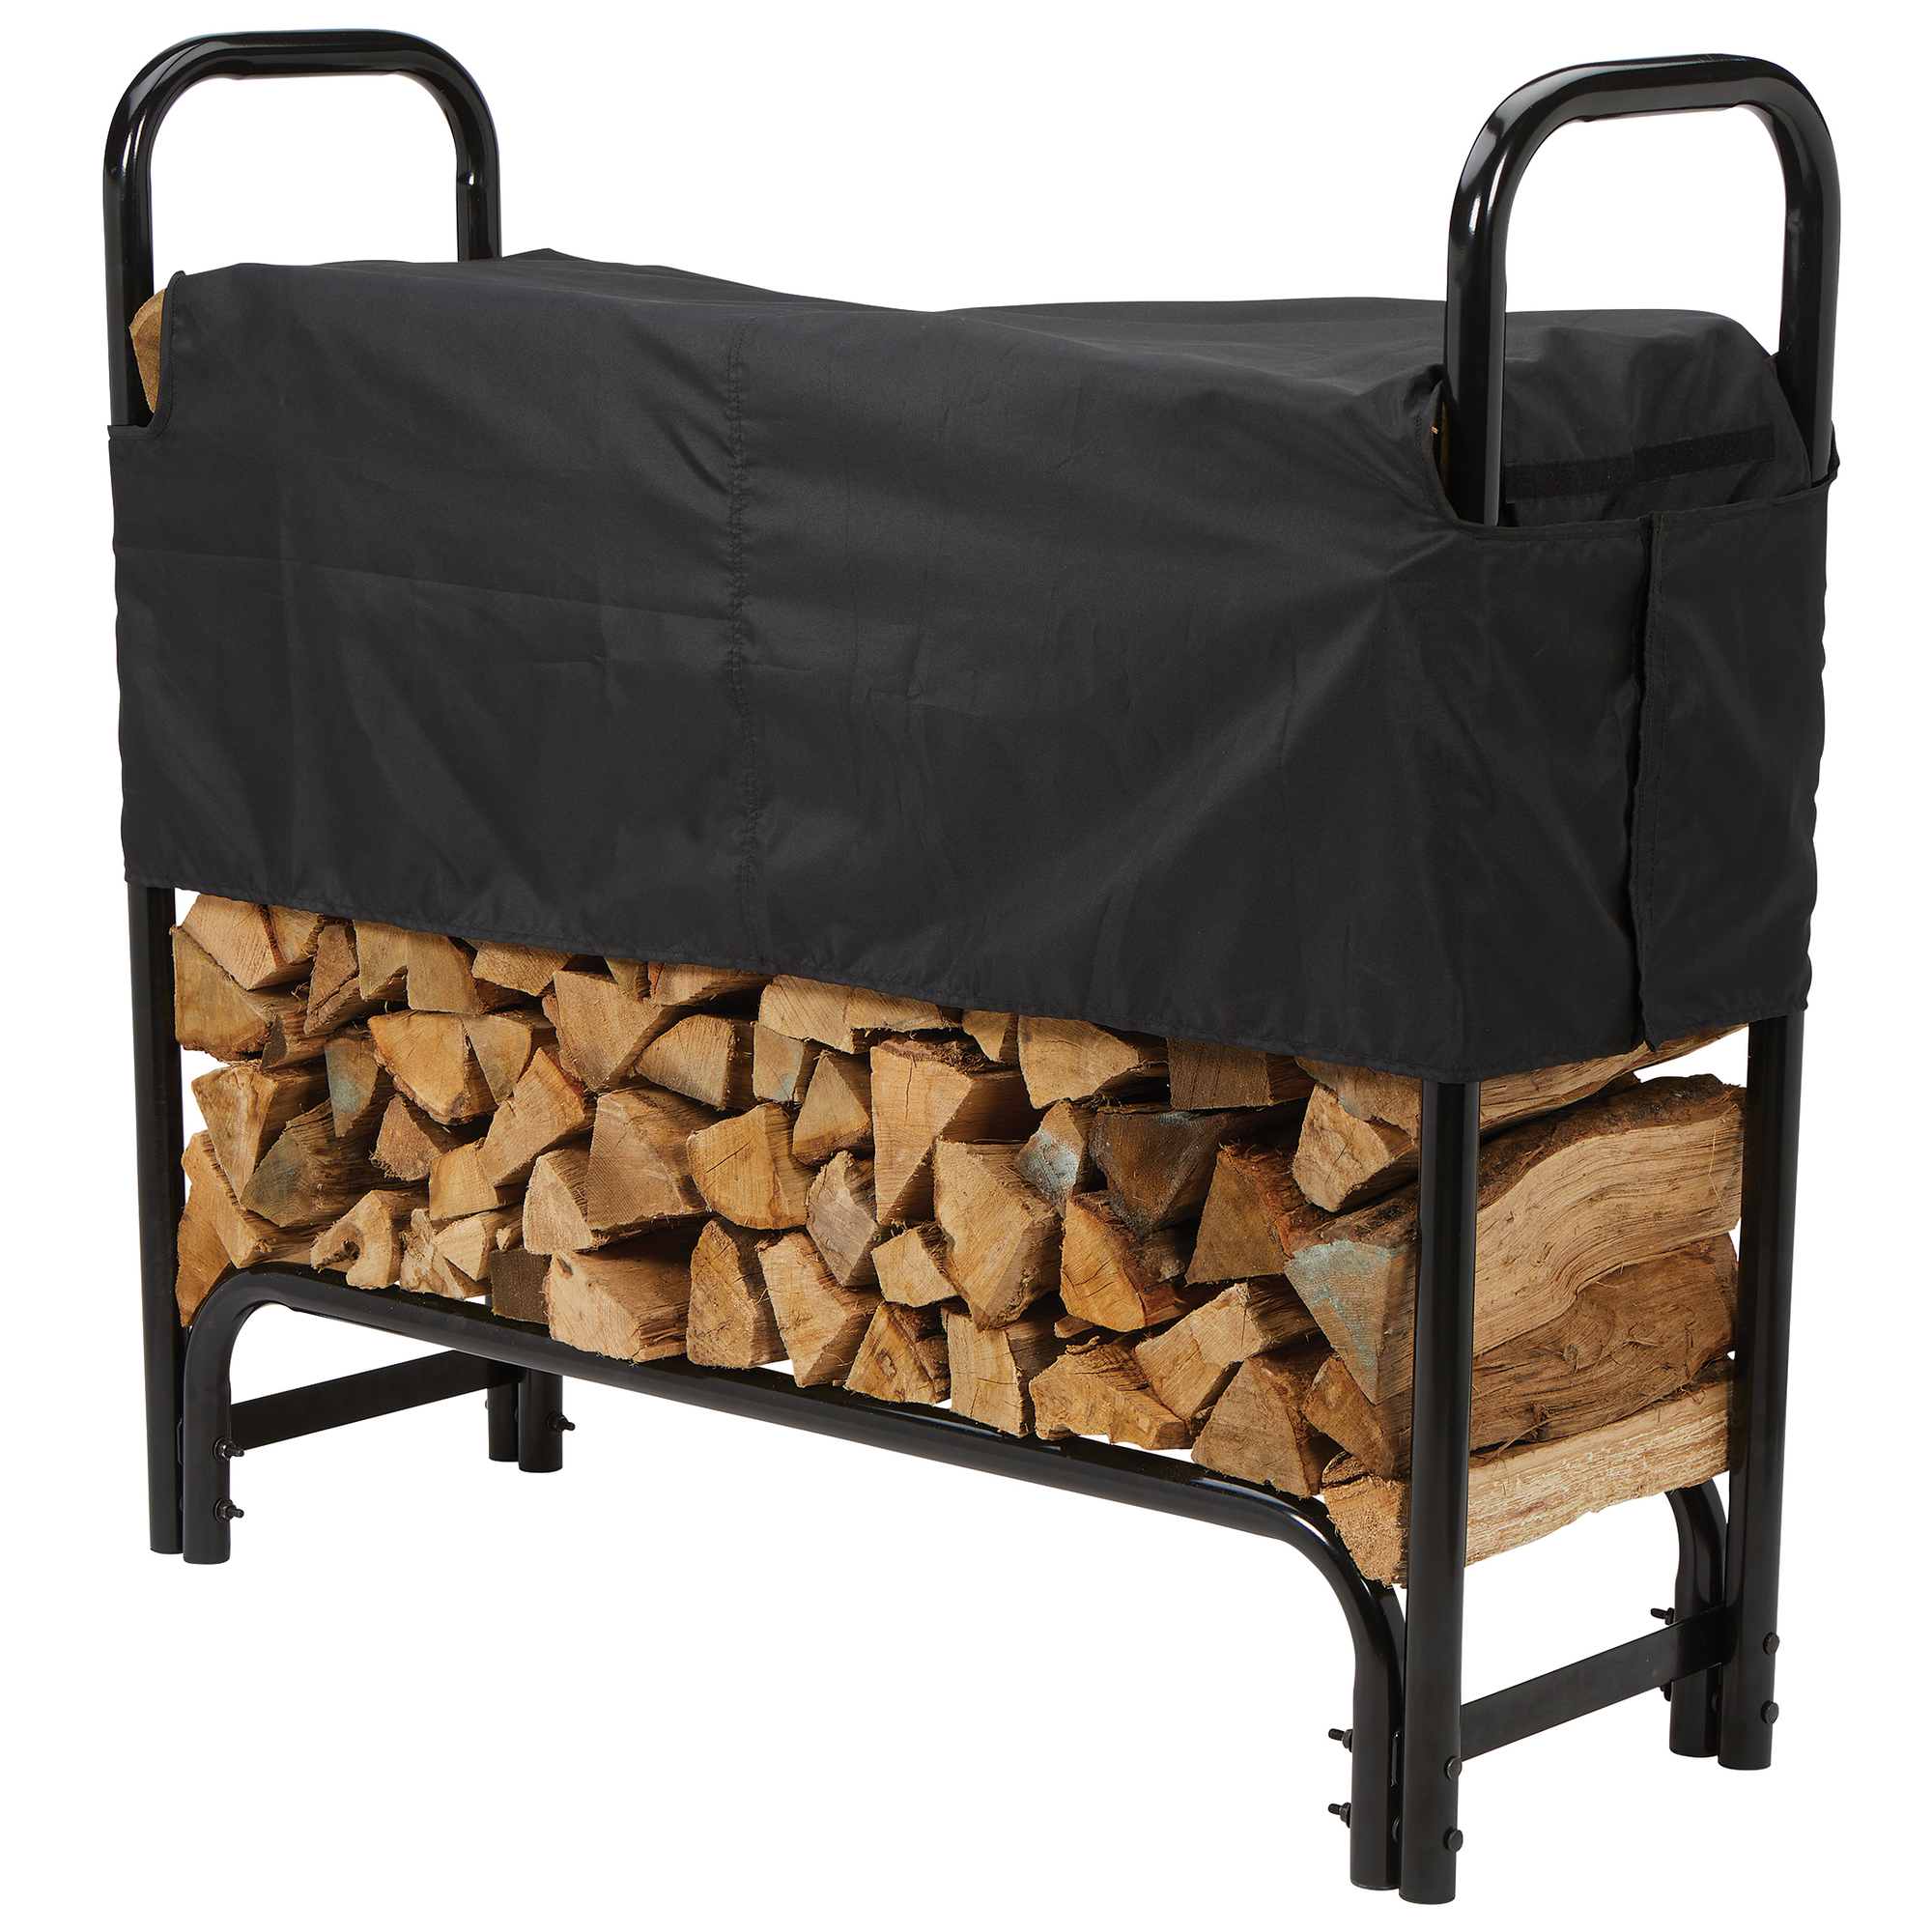 Roughneck 4ft. Firewood Rack with Cover, 1100-lb. Capacity, Steel Construction, Model 73202204